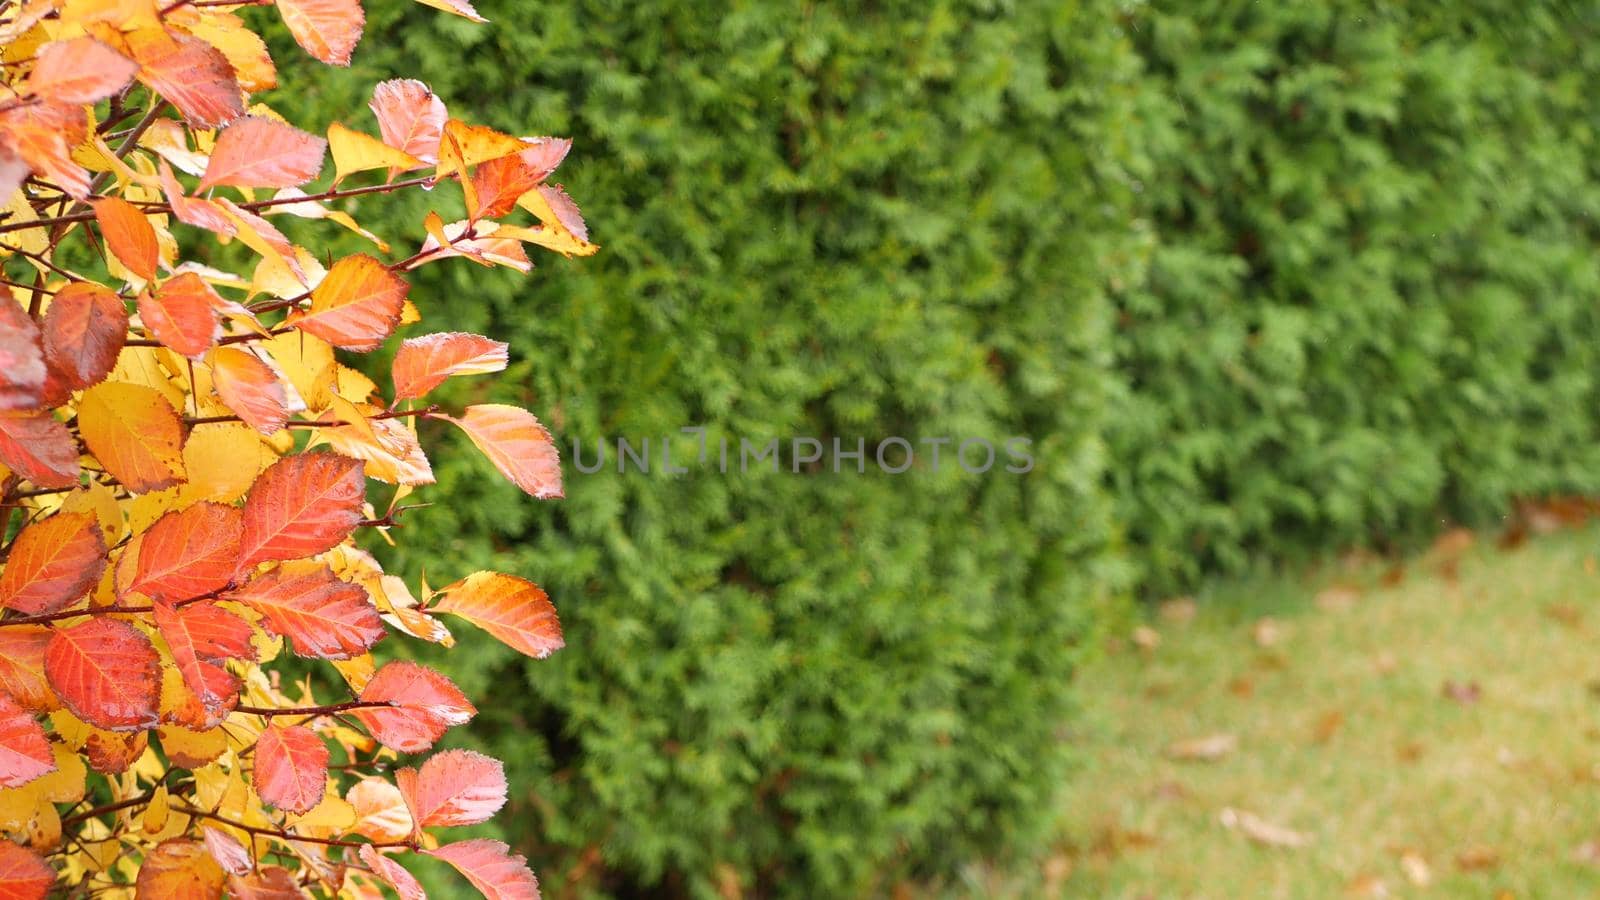 Yellow autumn leaves, orange fall leaf in ornamental garden. Leafage in park in september, october or november. Seasonal colorful foliage. Natural floral background. Trimmed bush or shrub plant wall.